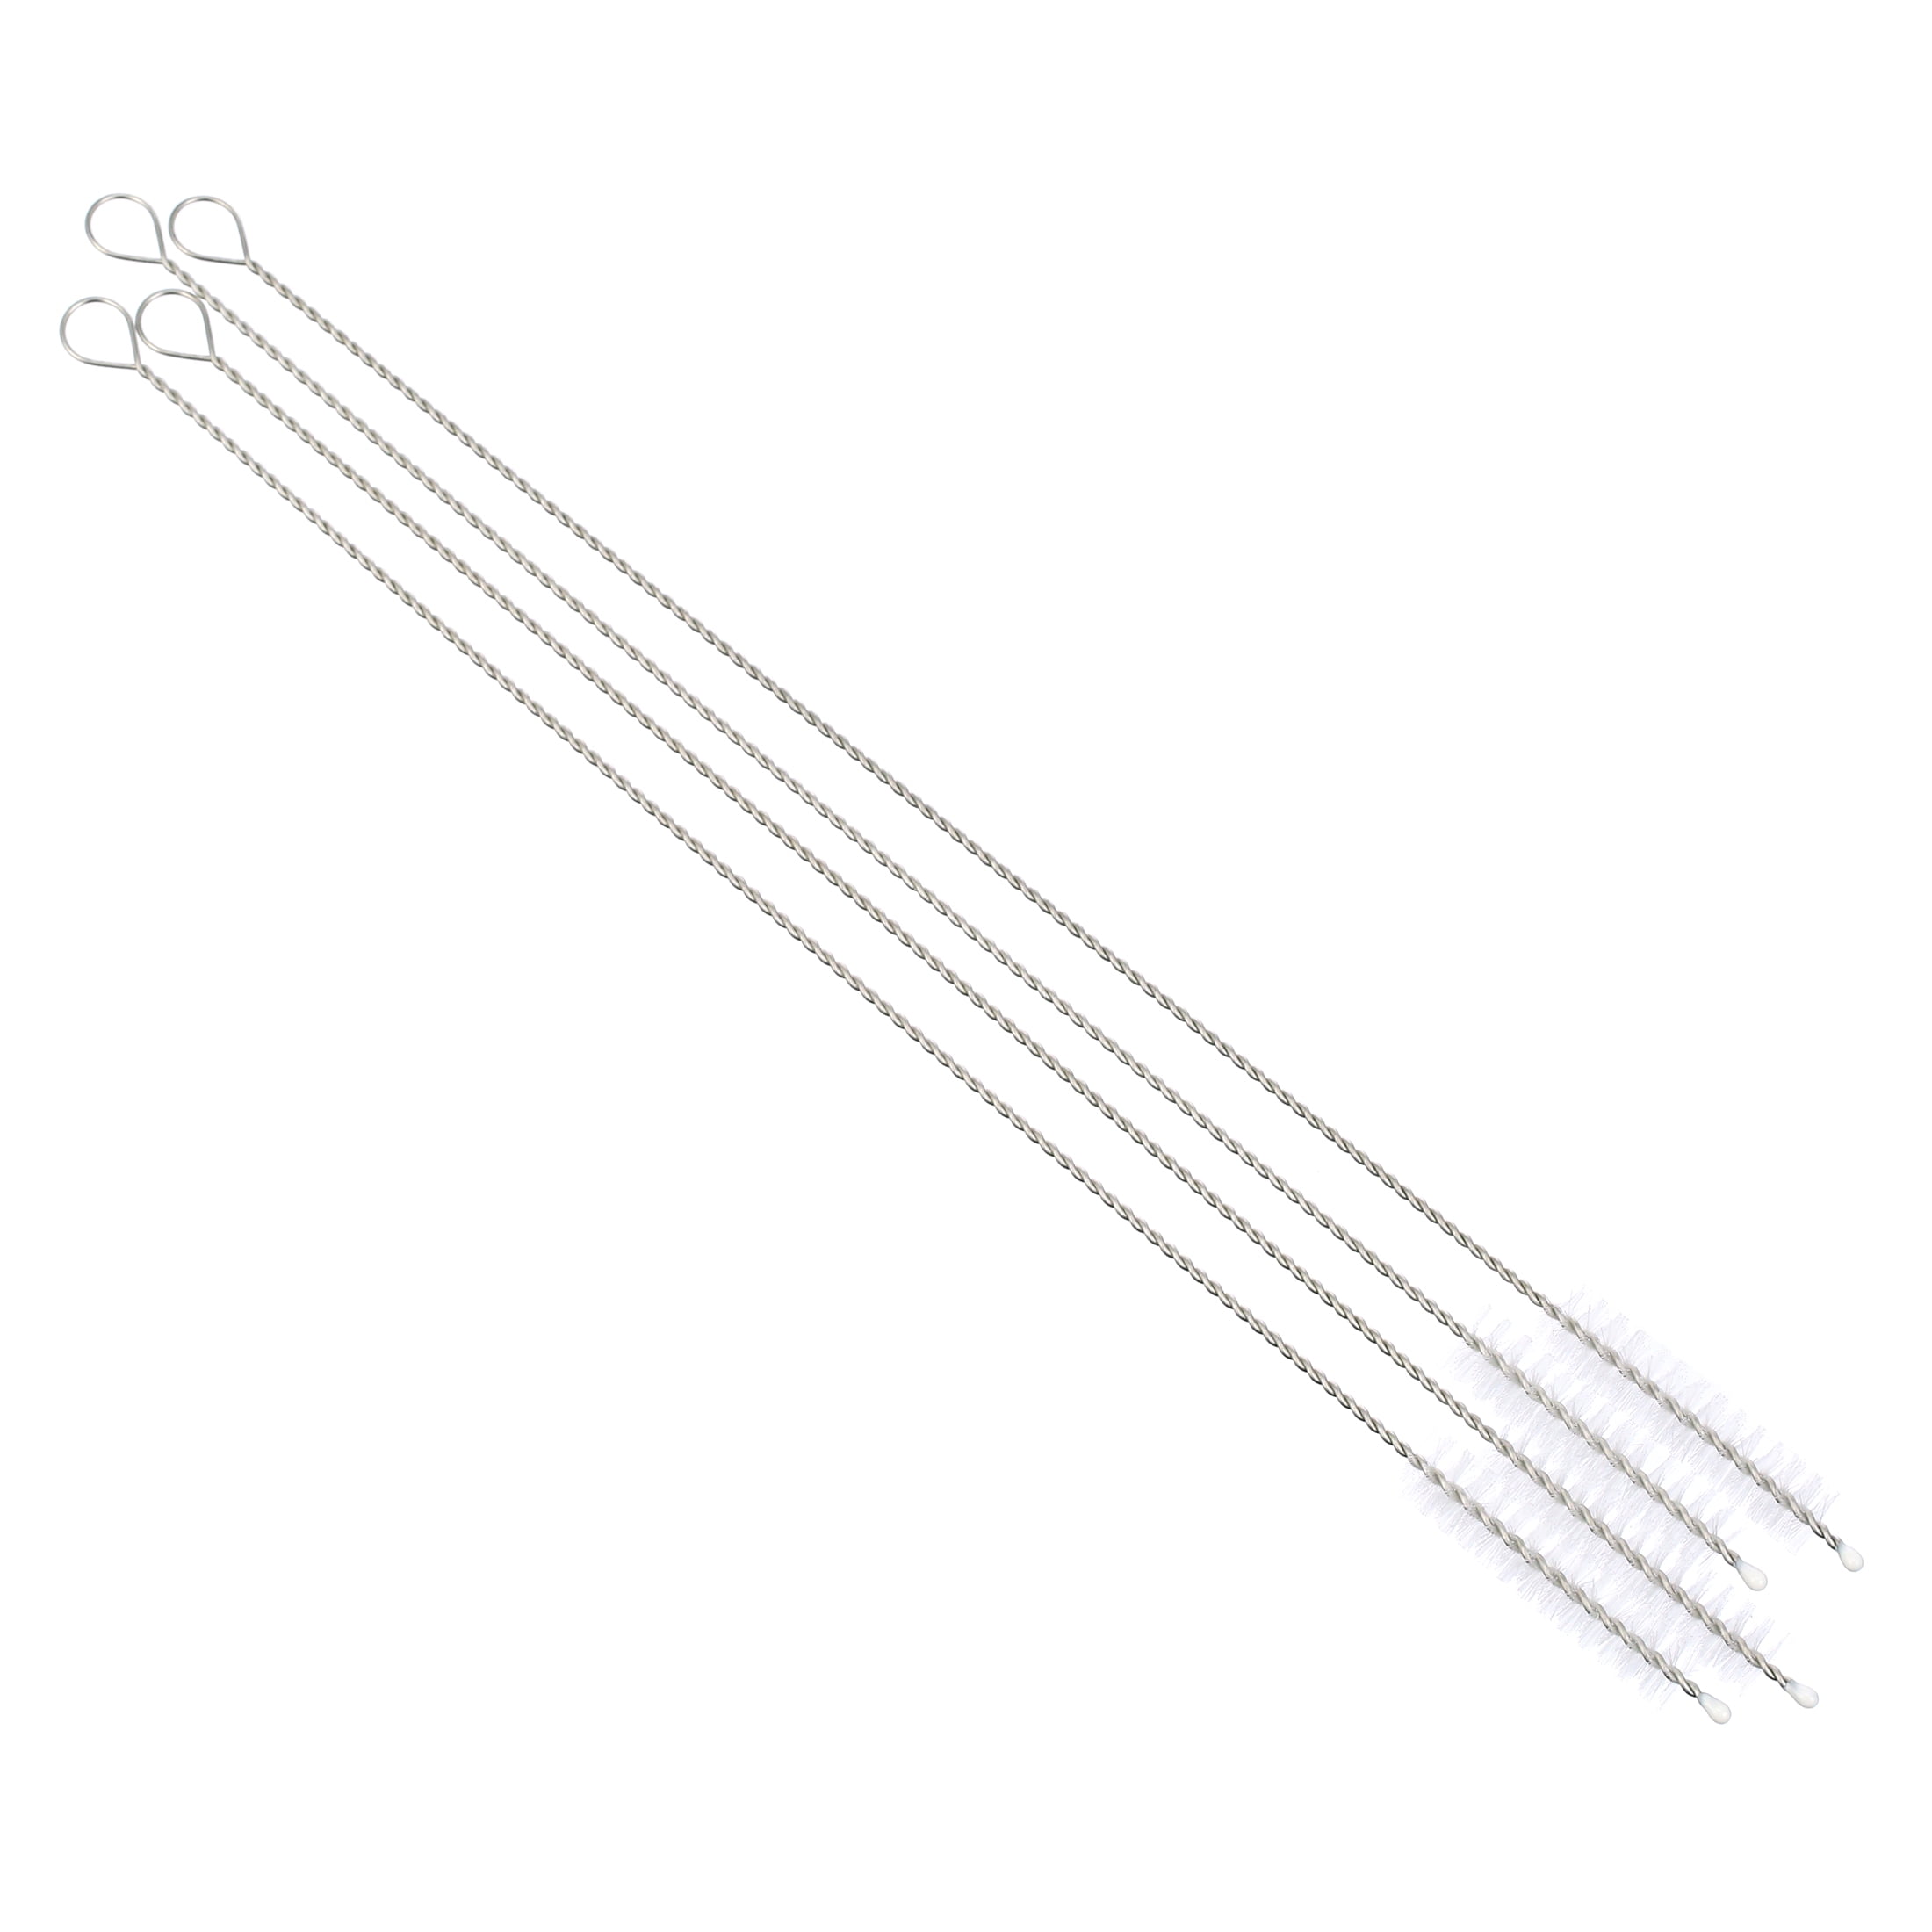 Small Straws Price, 2023 Small Straws Price Manufacturers & Suppliers